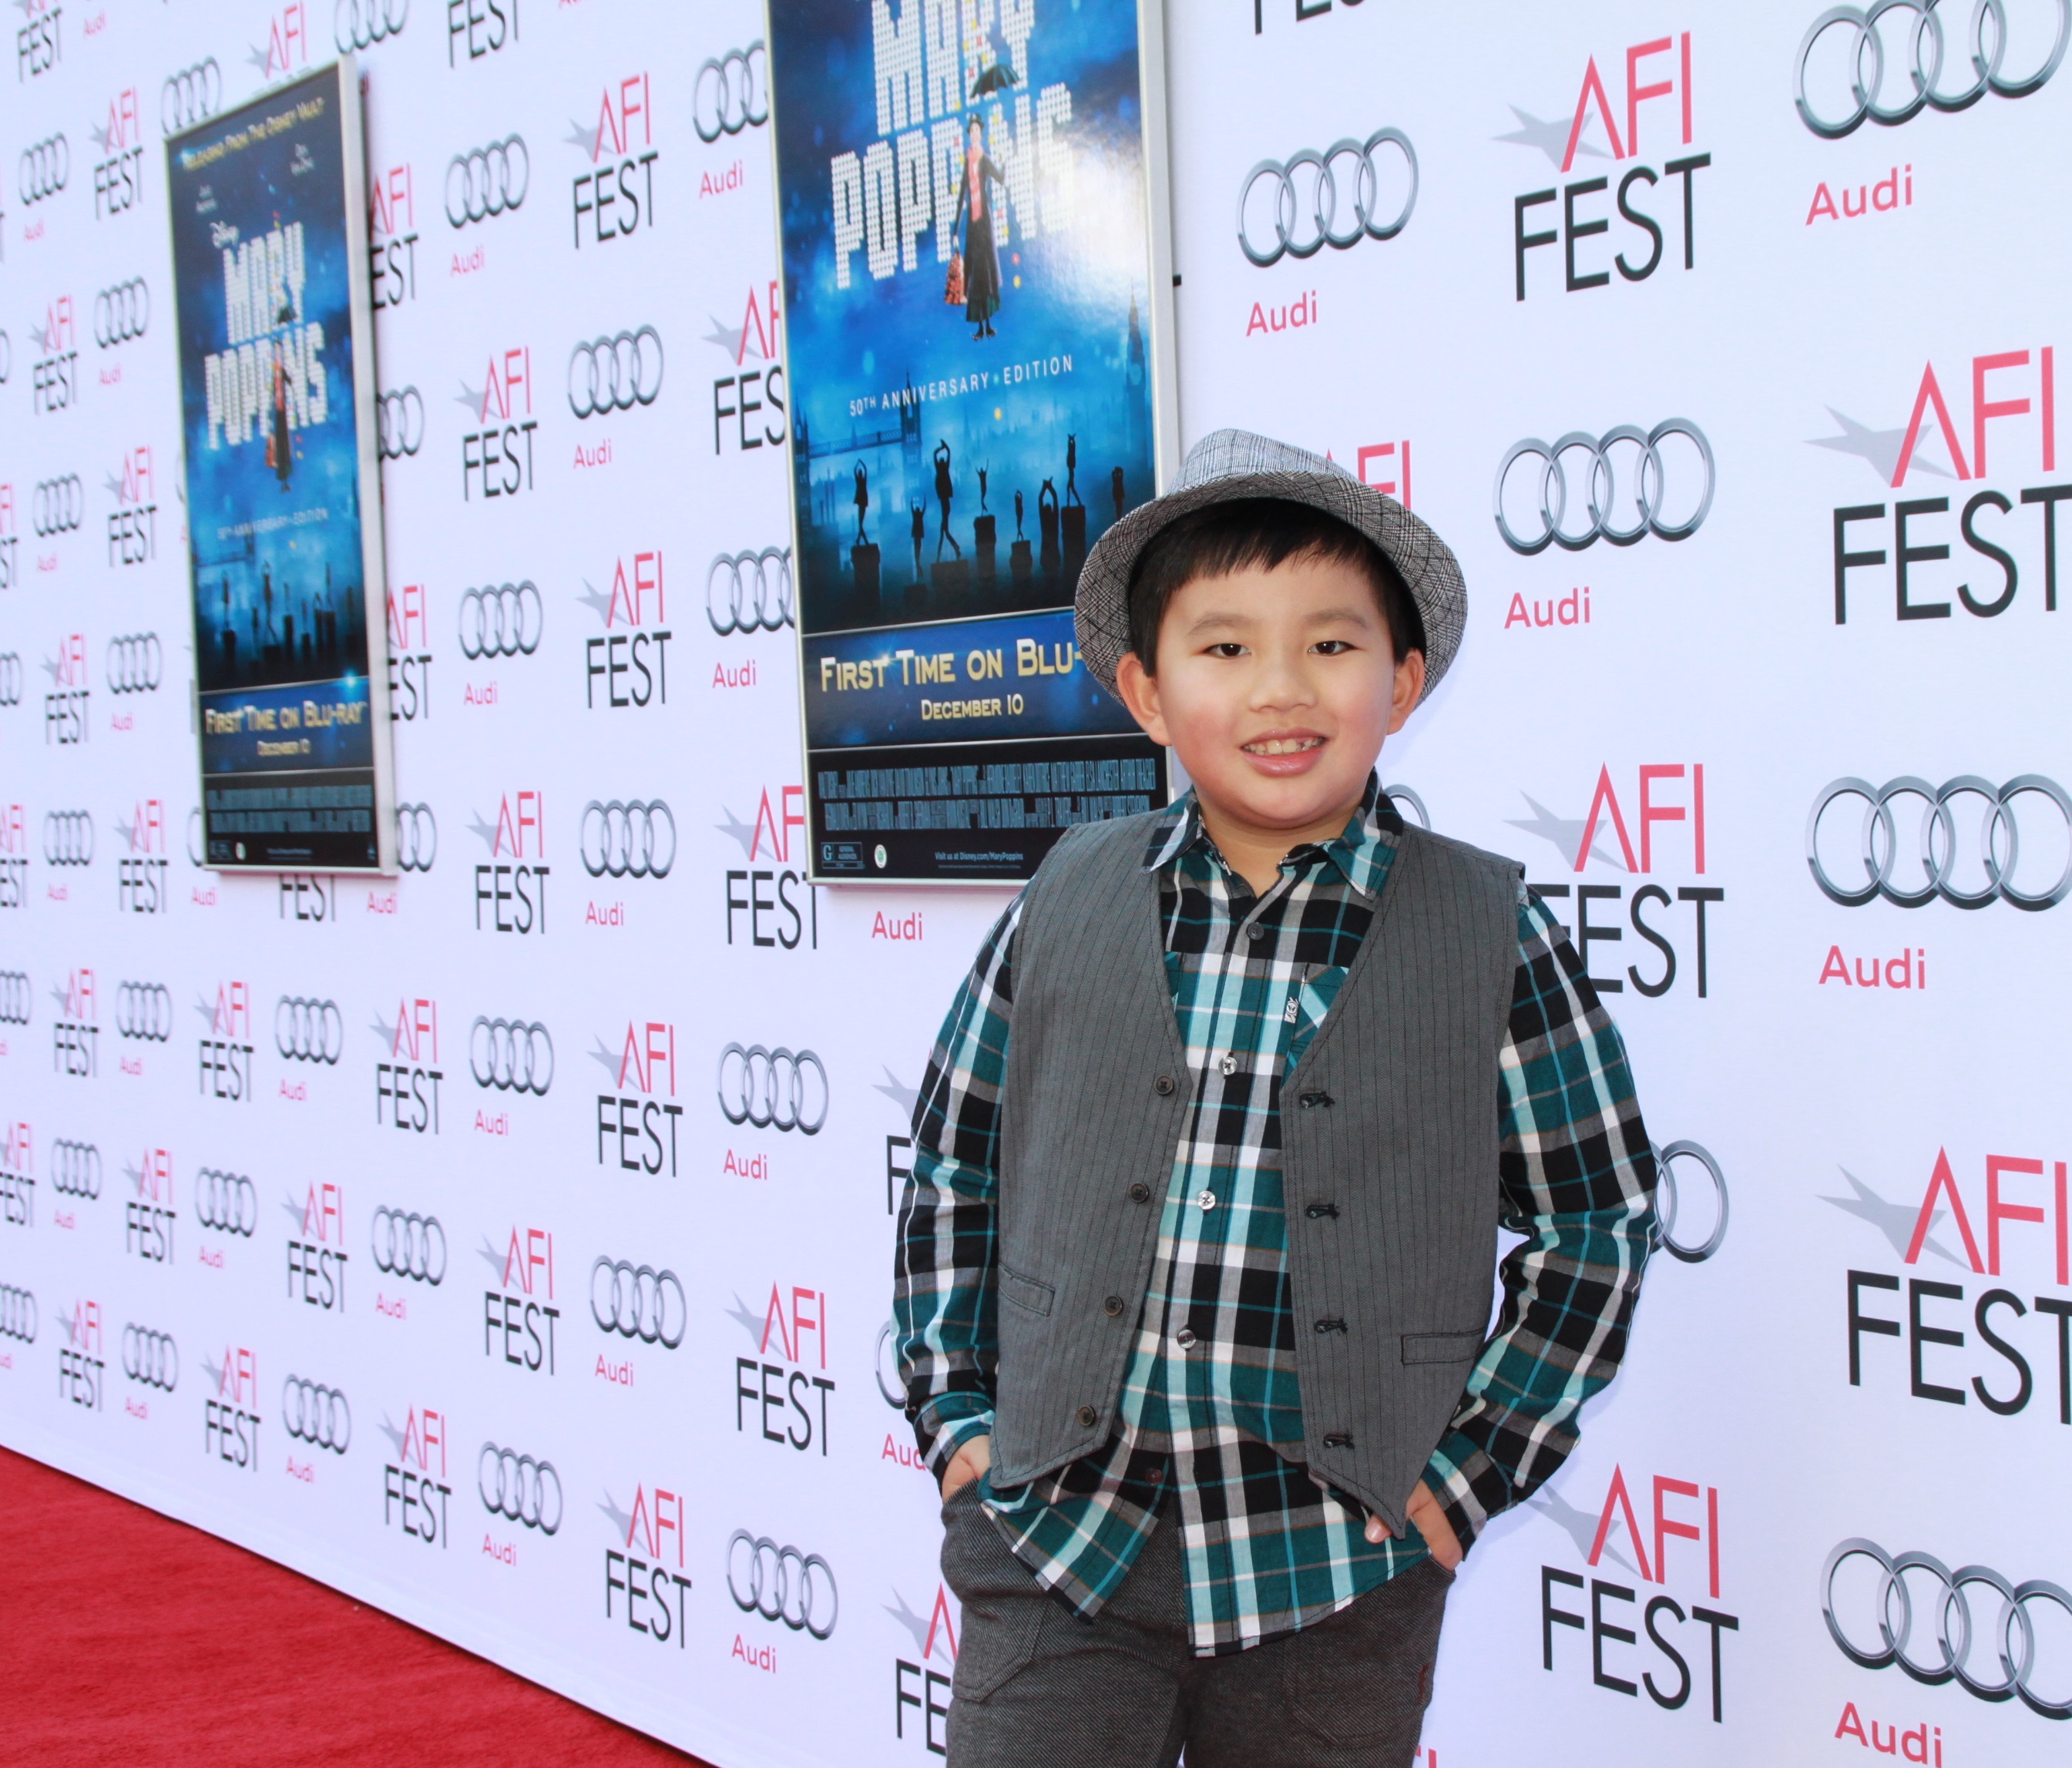 Albert on the Red Carpet of the 50th anniversary commemoration screening of Disney's 